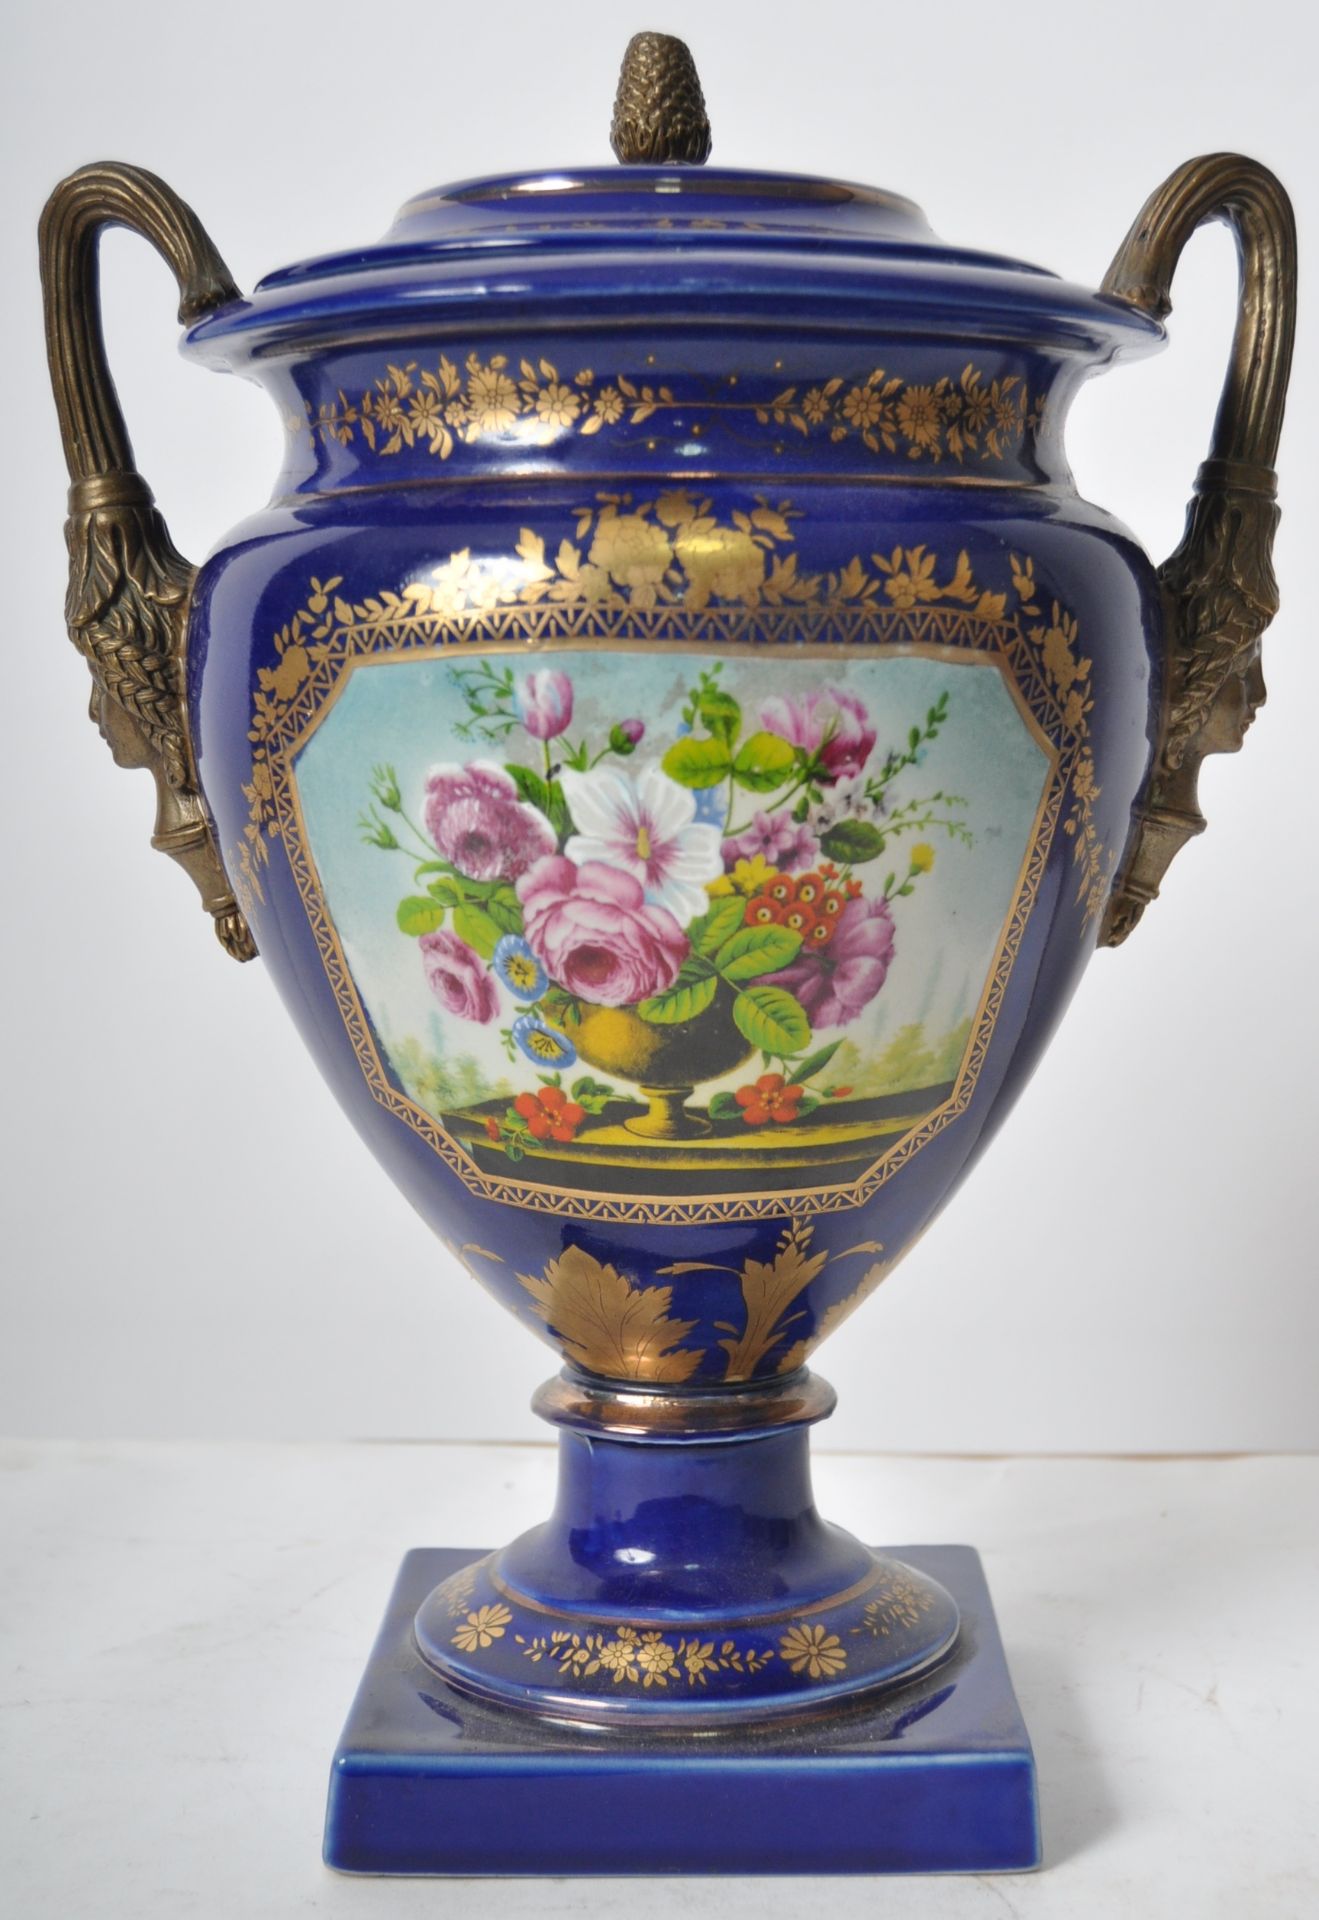 EARLY 20TH CENTURY PORCELAIN LIDDED URN - Image 6 of 11